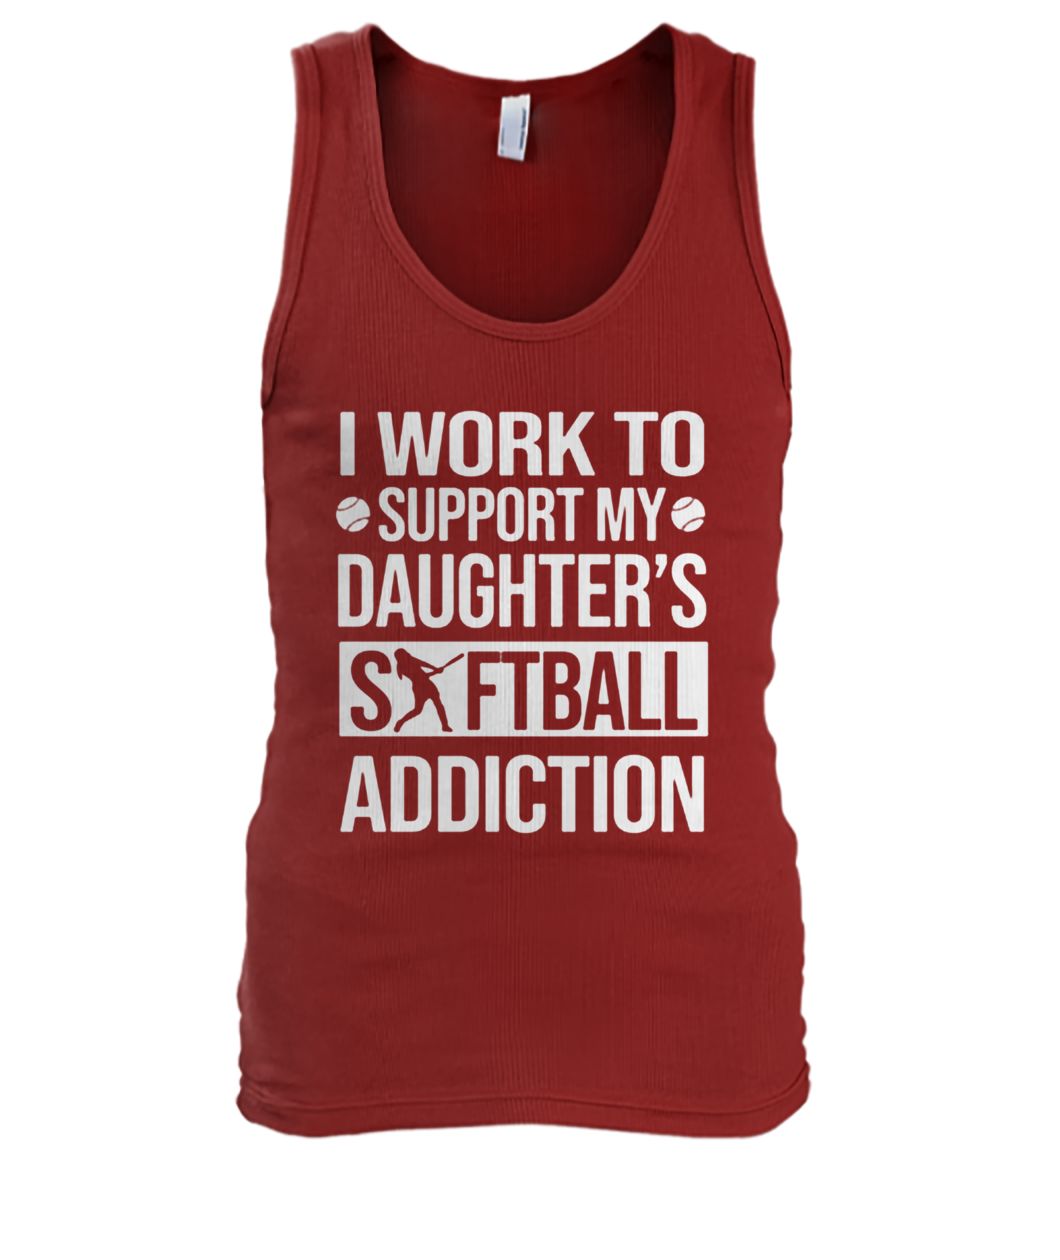 I work to support my daughter's softball addiction men's tank top